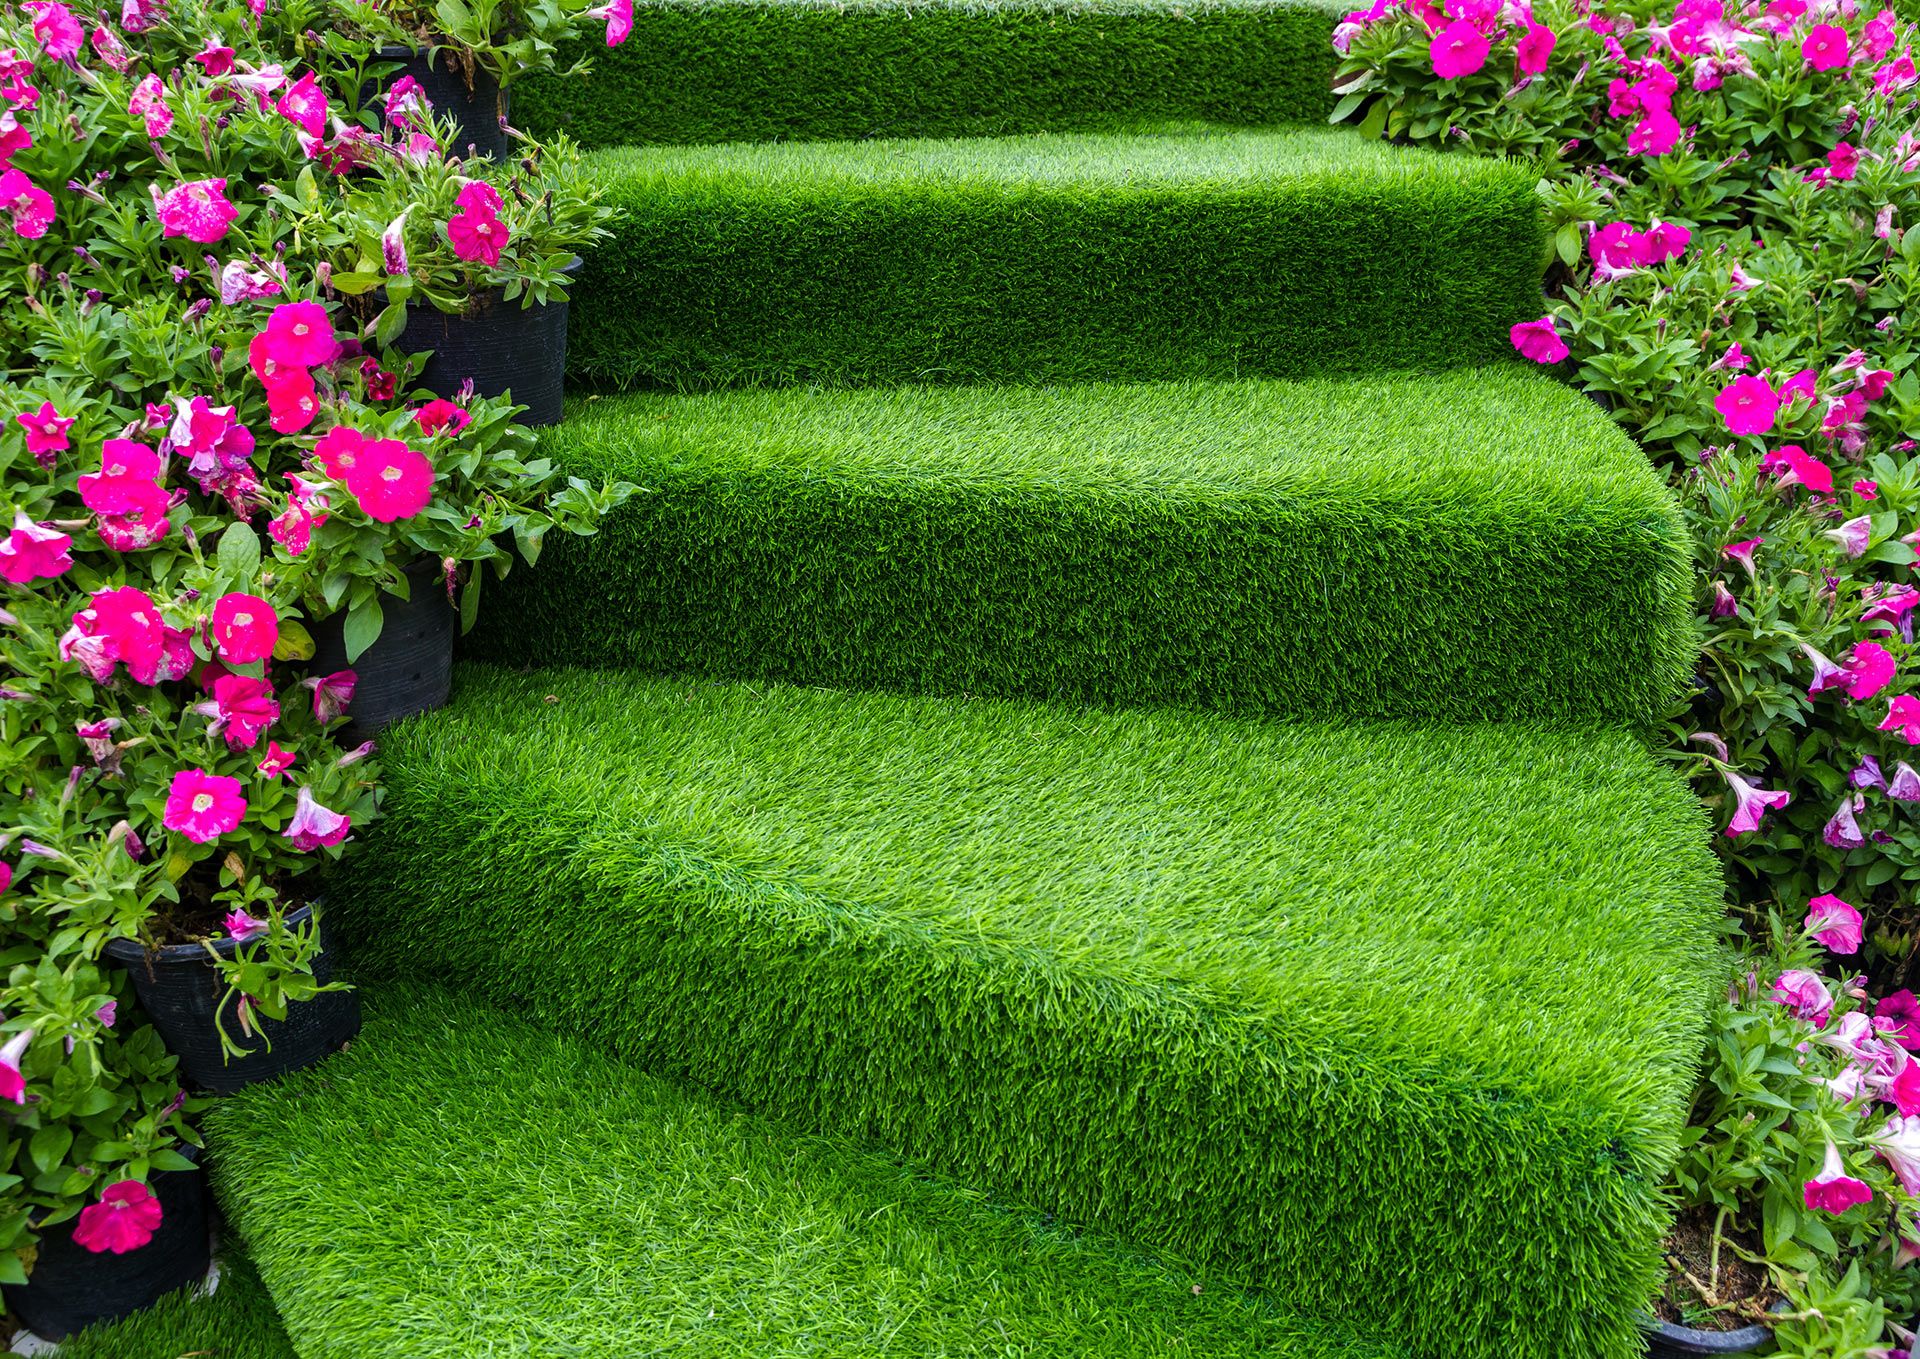 Ideal for environments that challenge natural grass